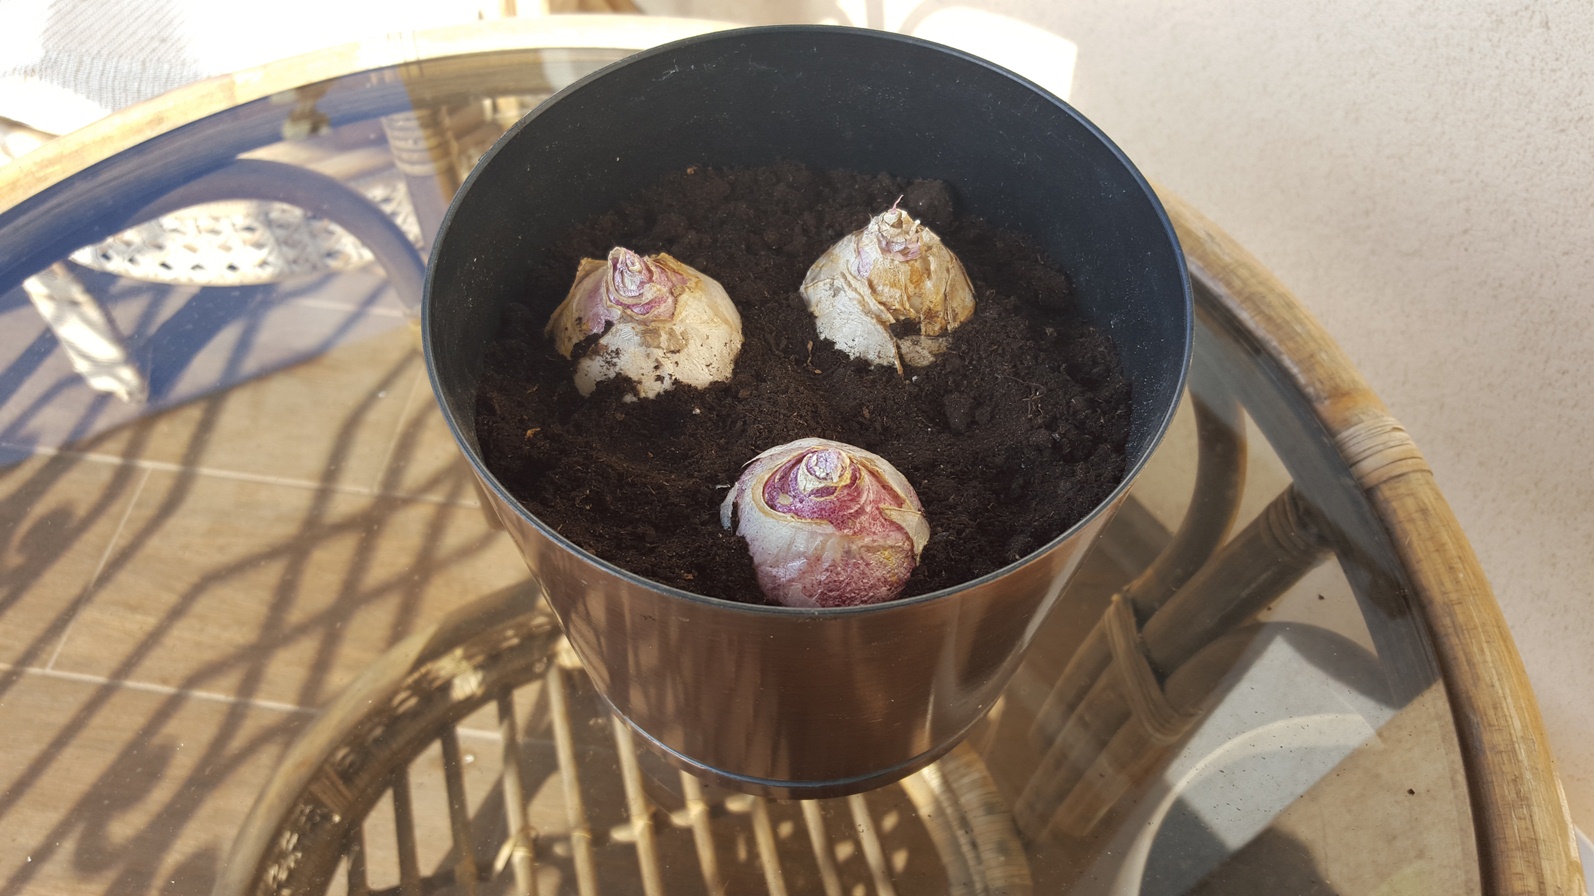 Planting Bulbs in a Pot